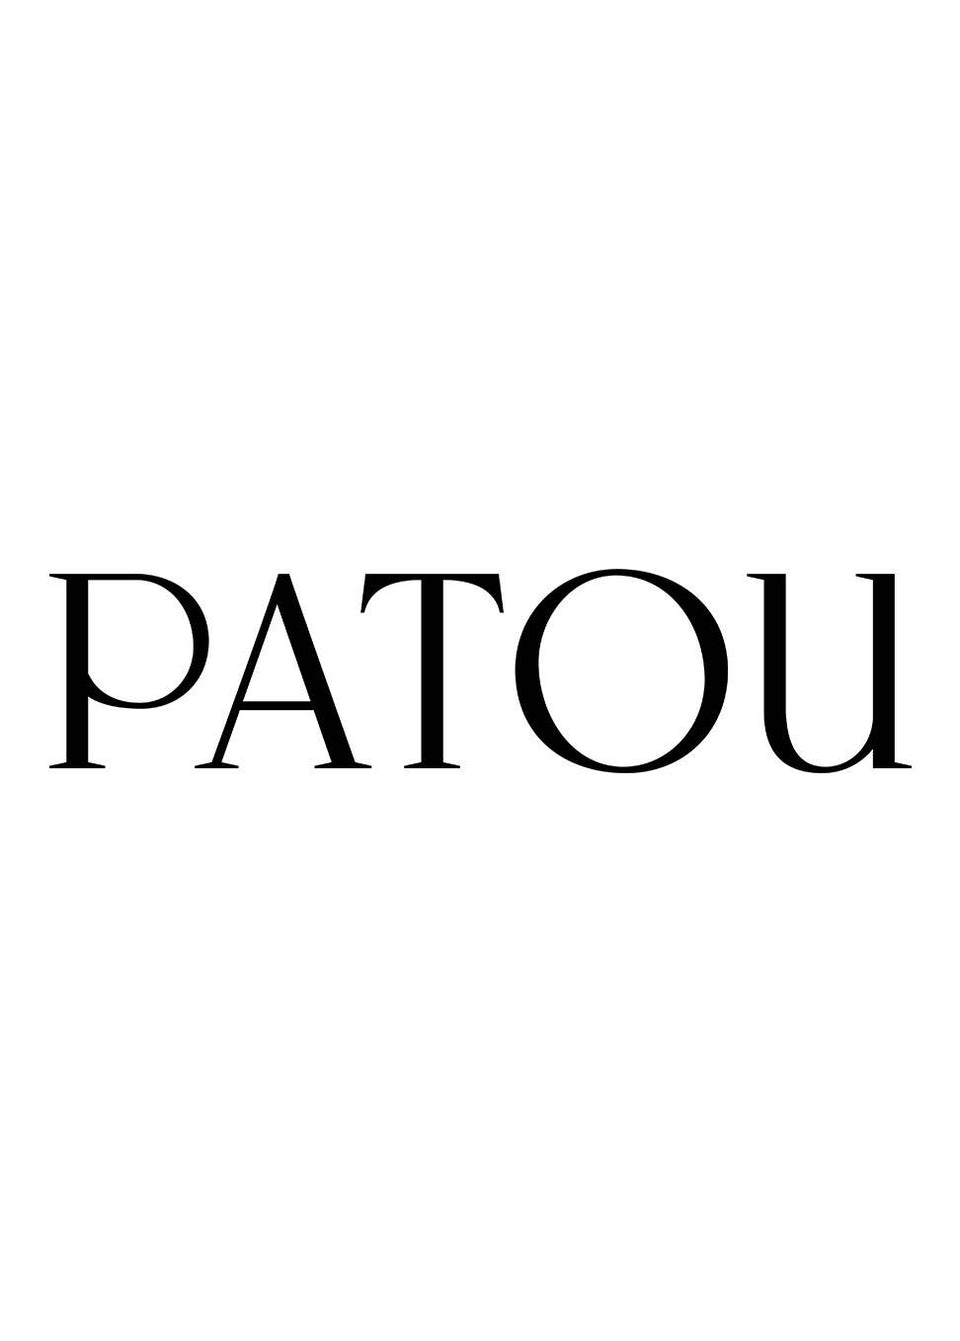 collections/patou.jpg